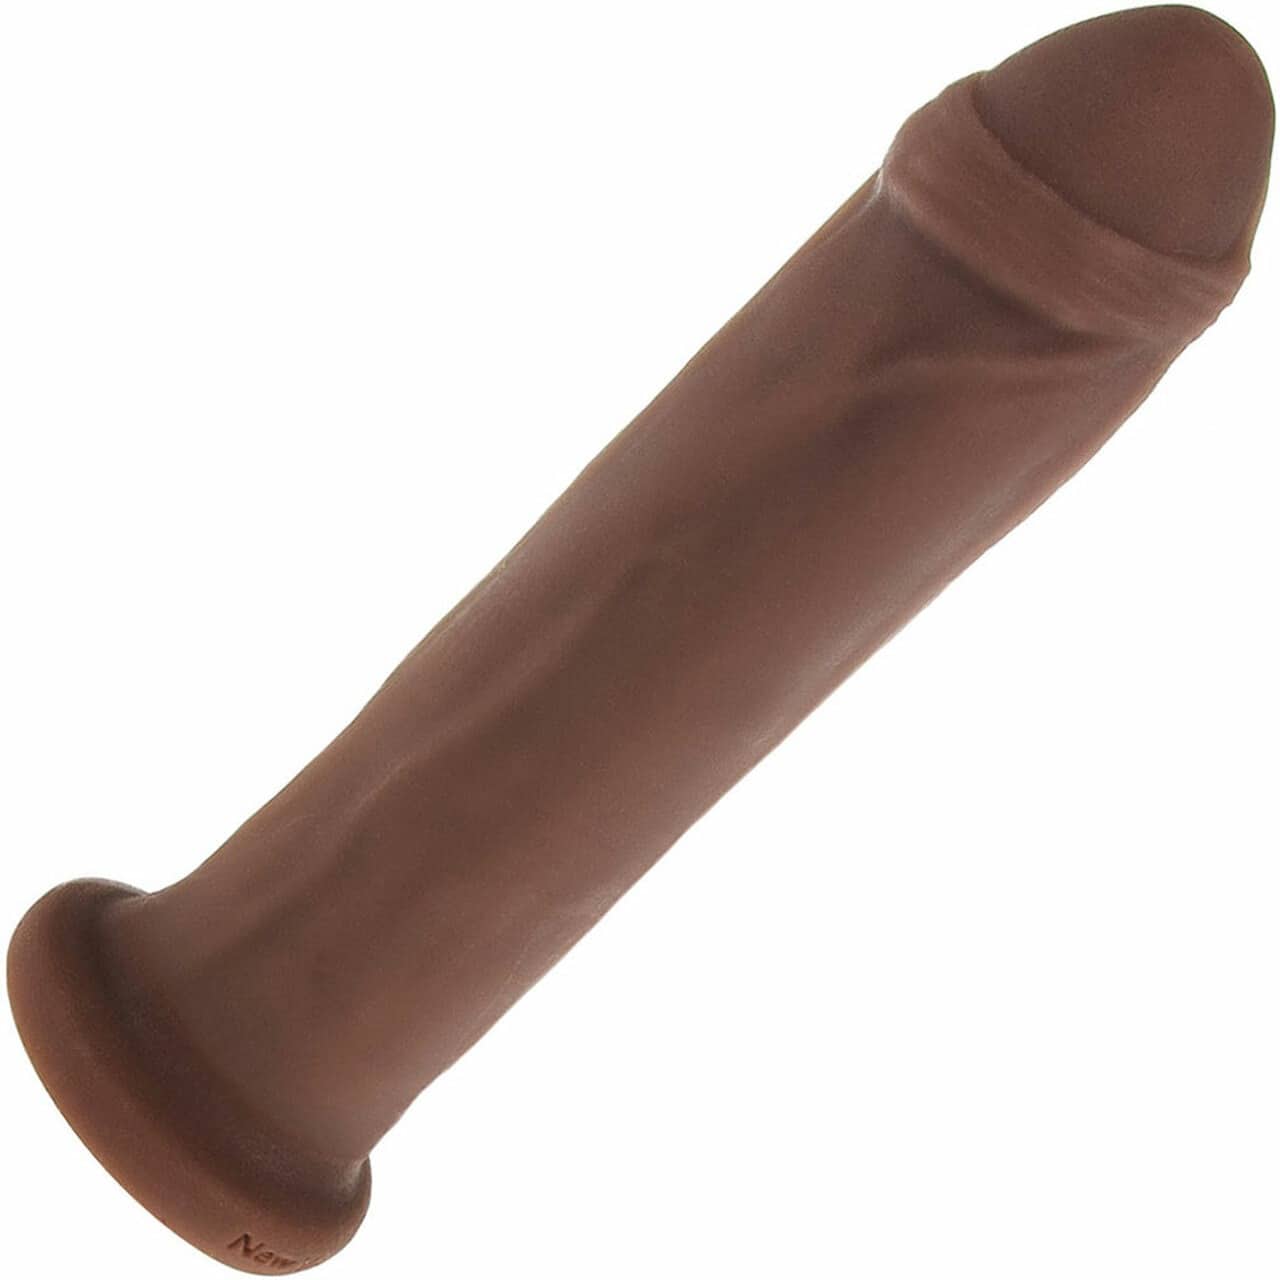 Product New York Toy Collective Leroy Uncut Dildo 